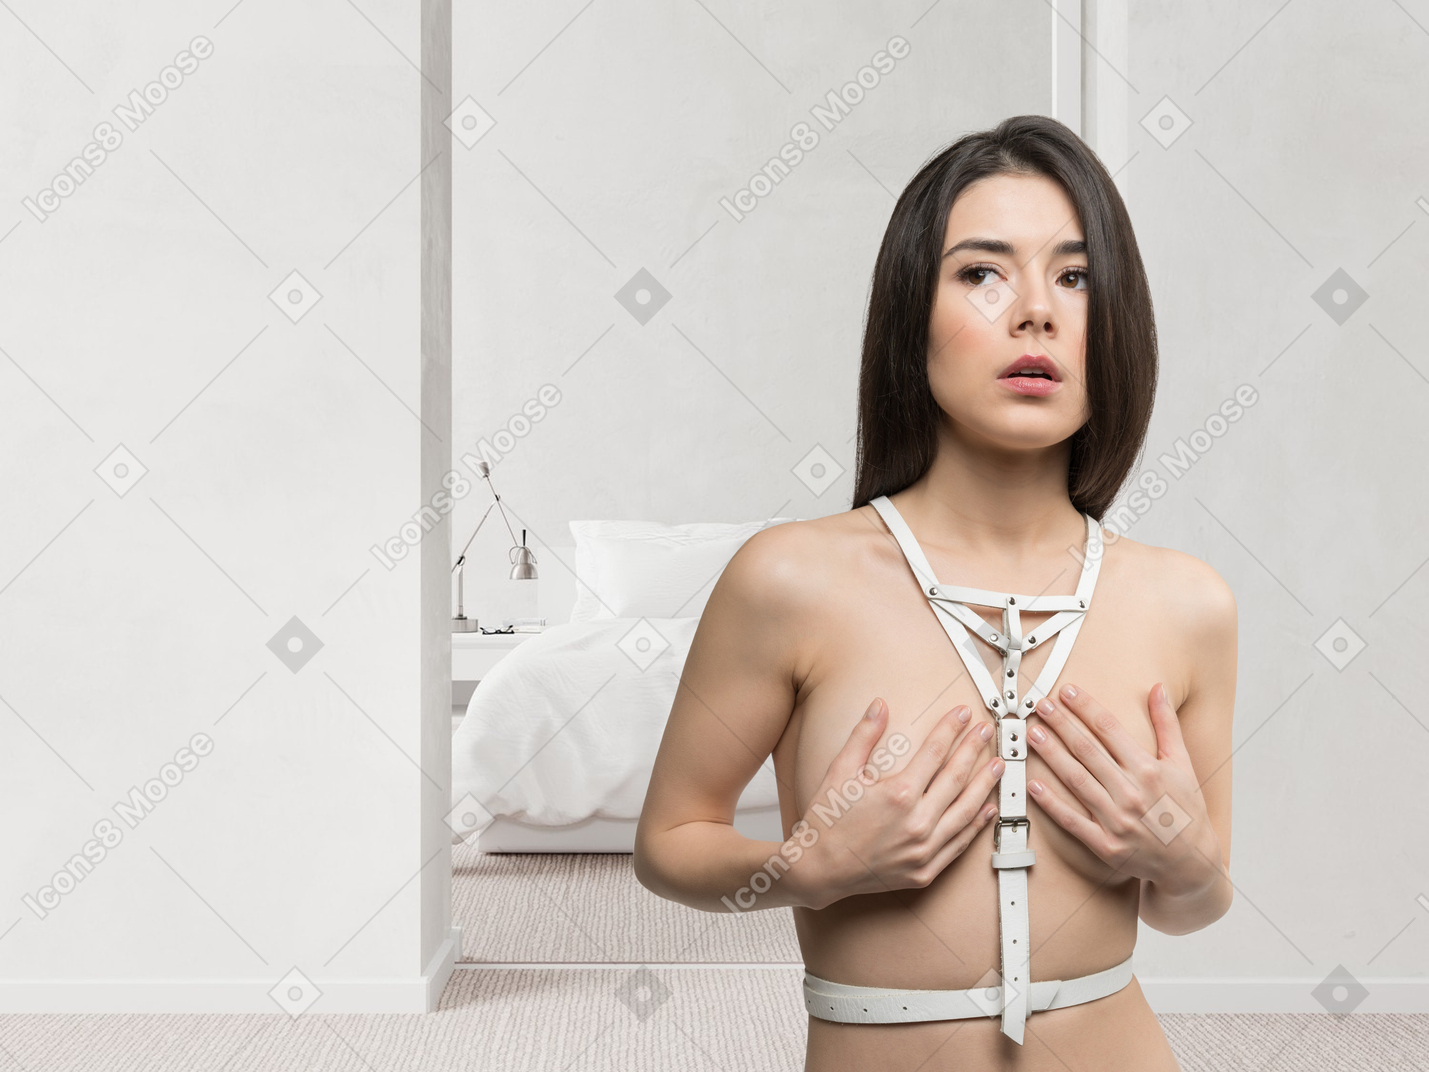 A woman in a white leather body harness with her hands on her chest